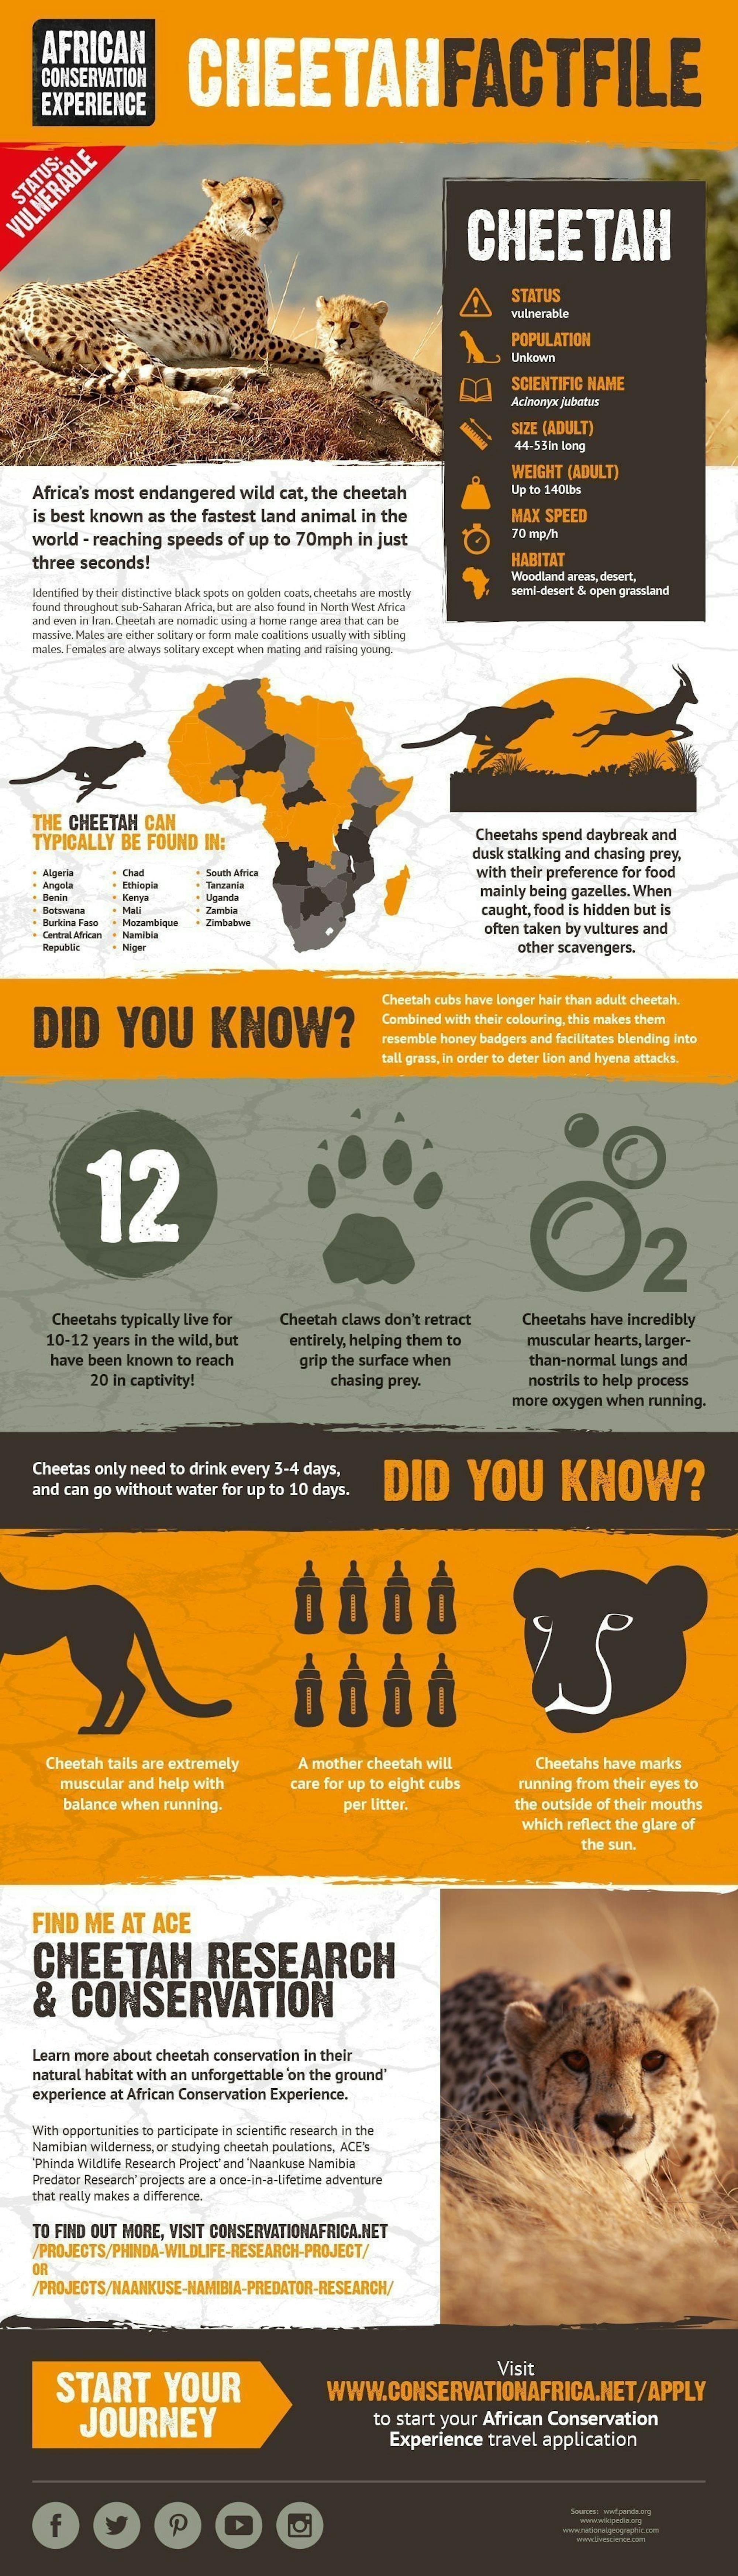 Infographic: Facts about Cheetahs